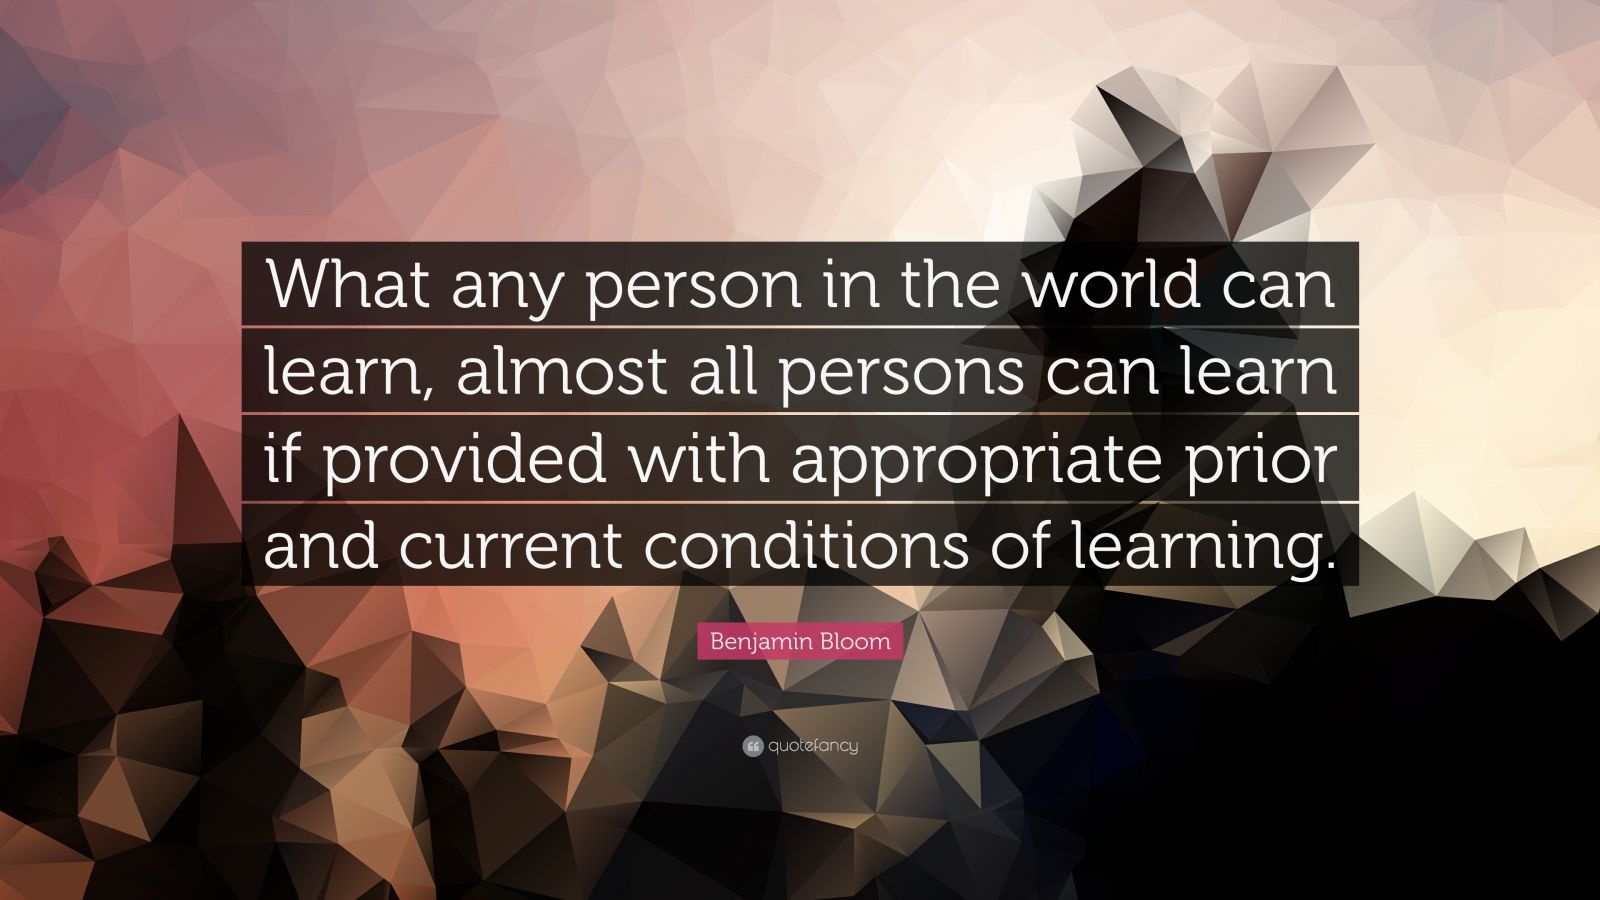 Benjamin Bloom Quote: “What any person in the world can ...